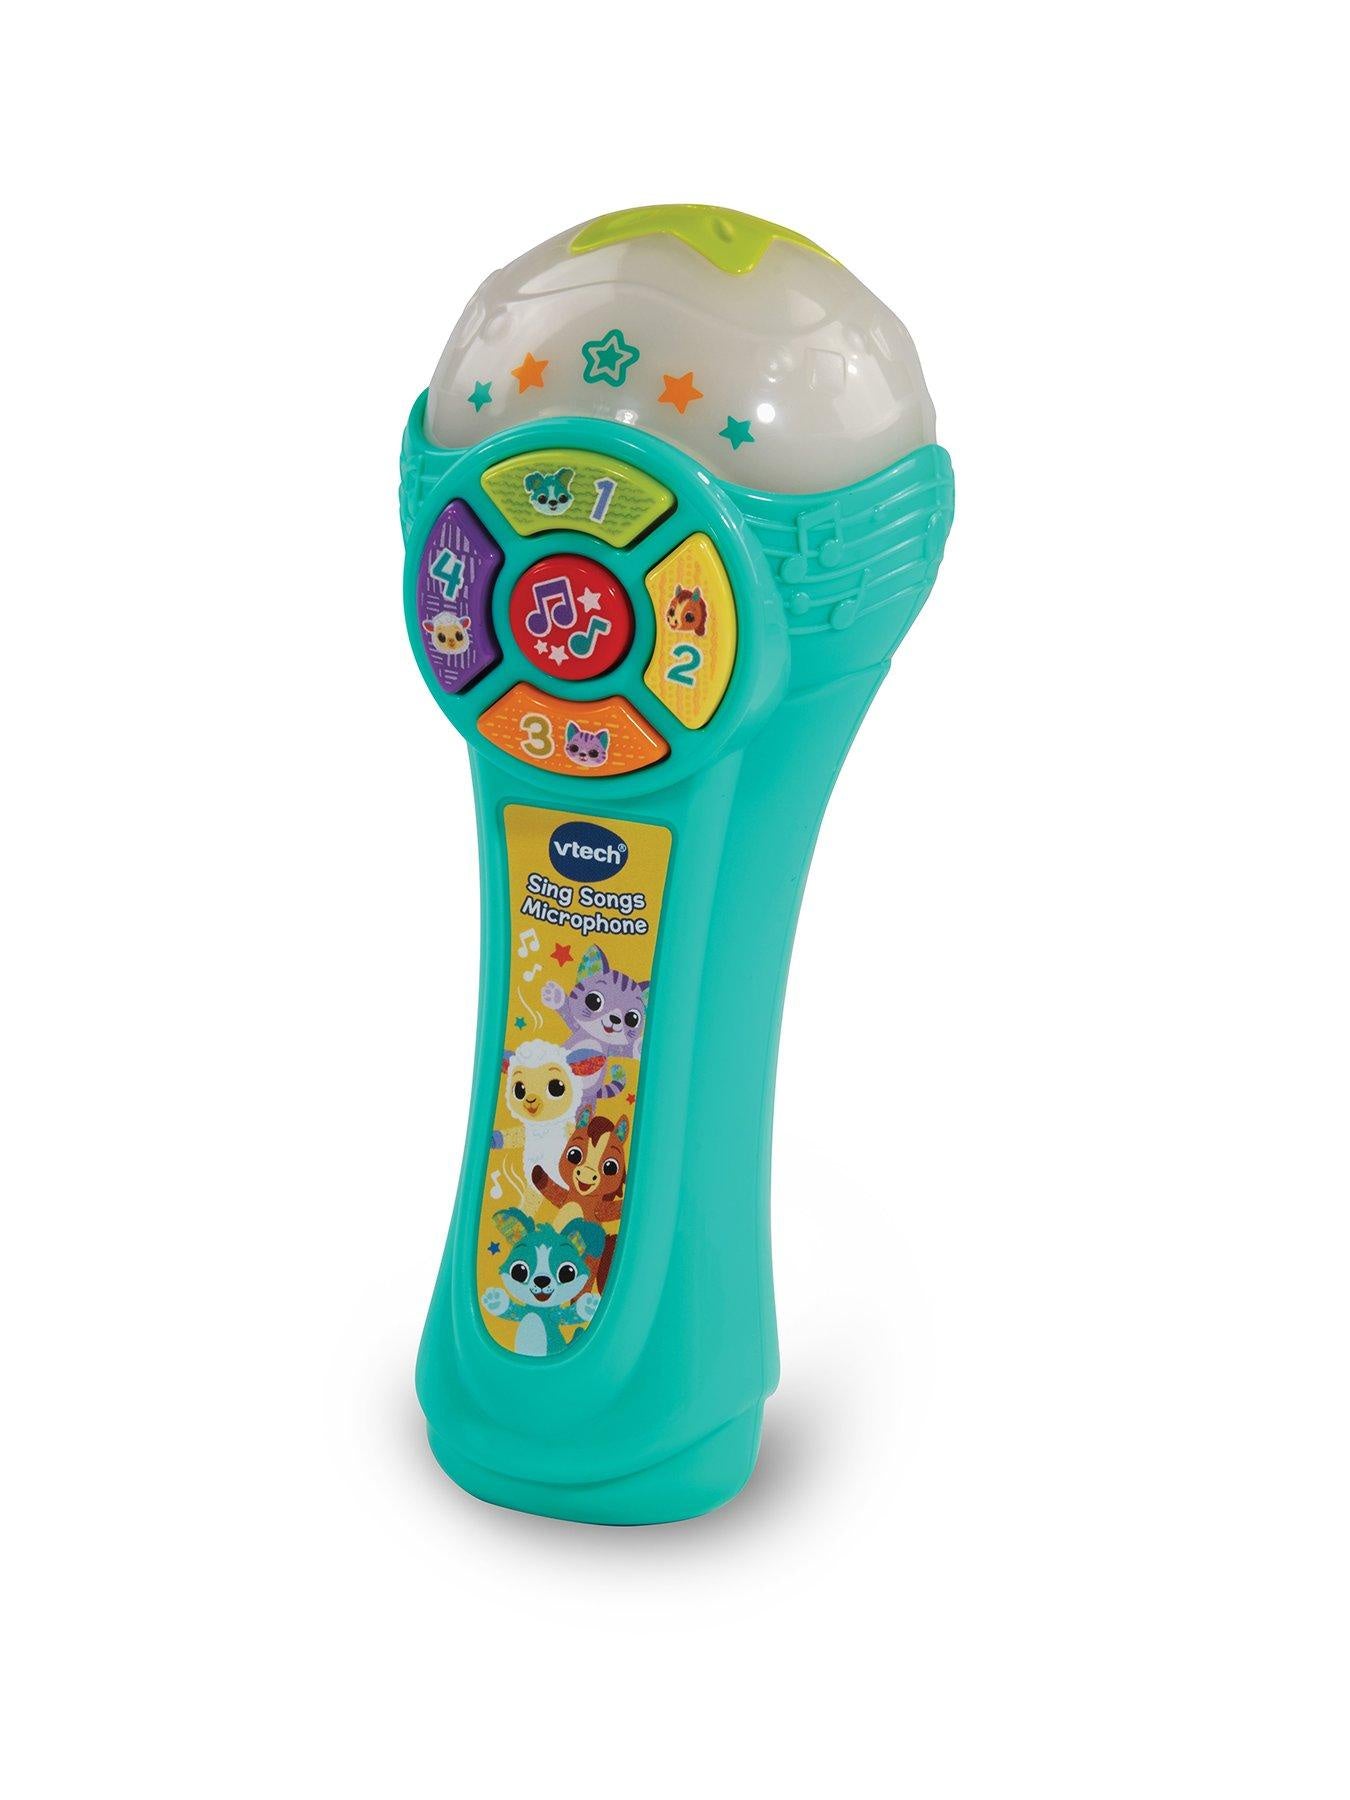 VTech Sing Songs Microphone